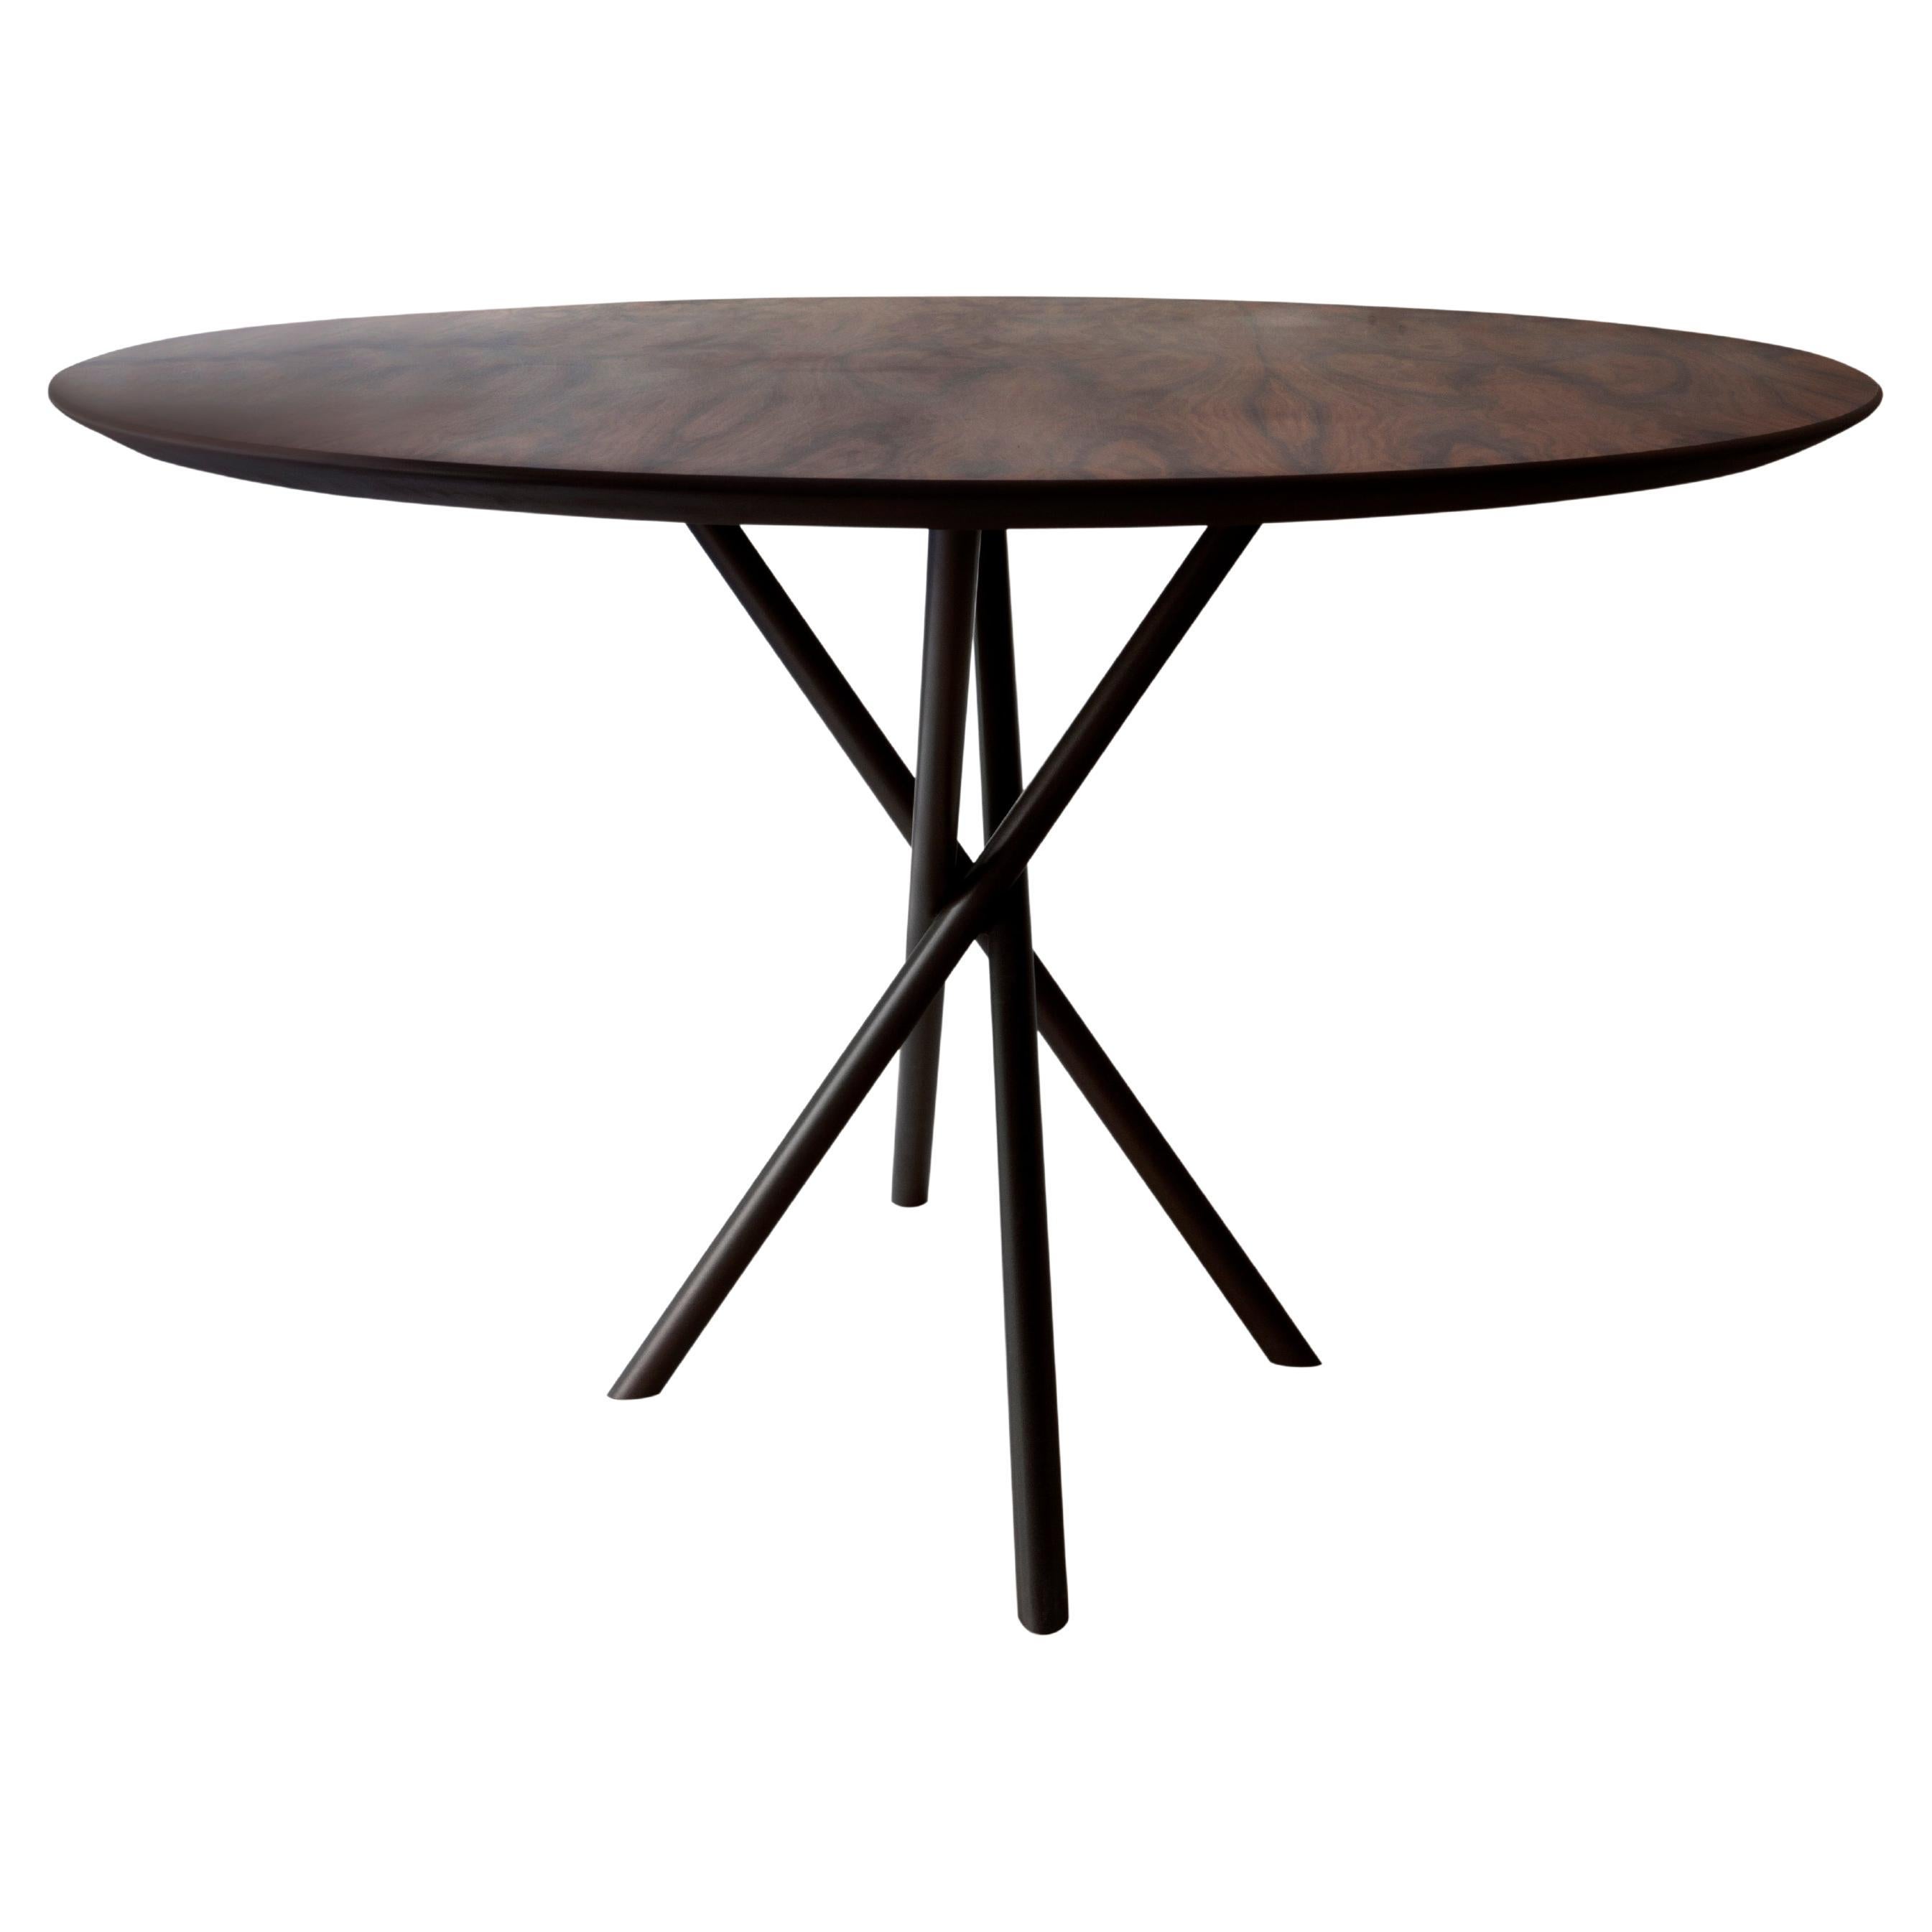 "Hastes" Modernist Round Dining Table Black Steel and Walnut Wood For Sale